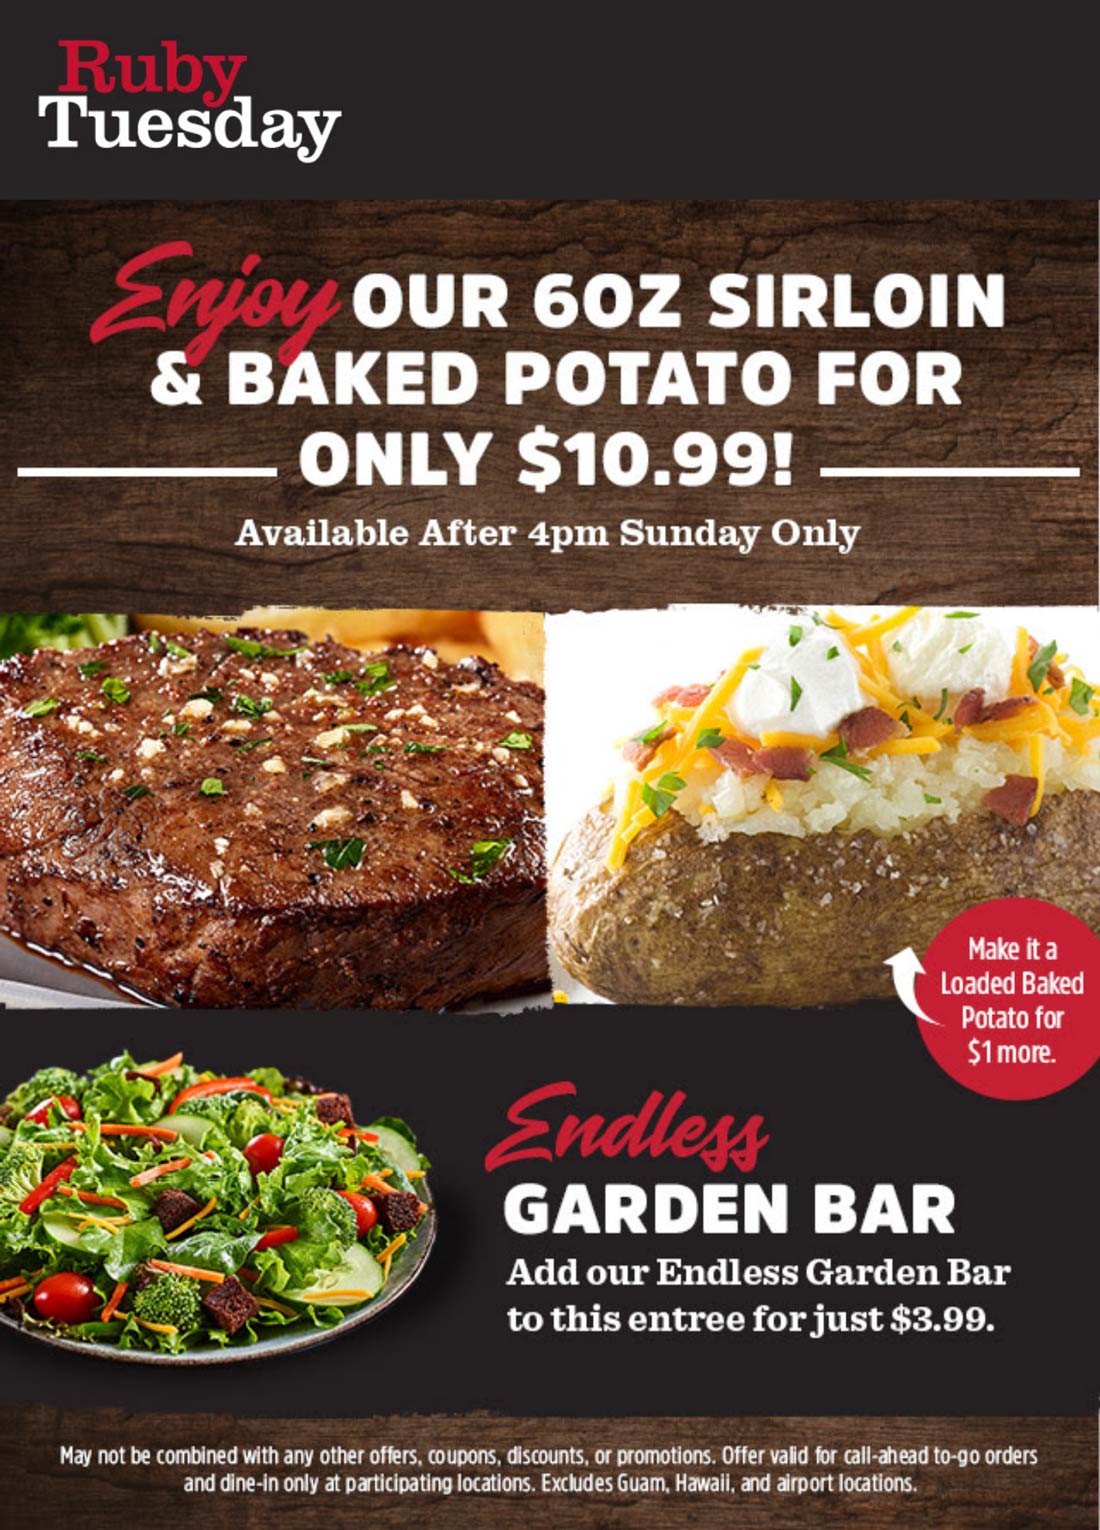 Ruby Tuesday restaurants Coupon  Sirloin steak + baked potato for $11 after 4p today at Ruby Tuesday restaurants #rubytuesday 